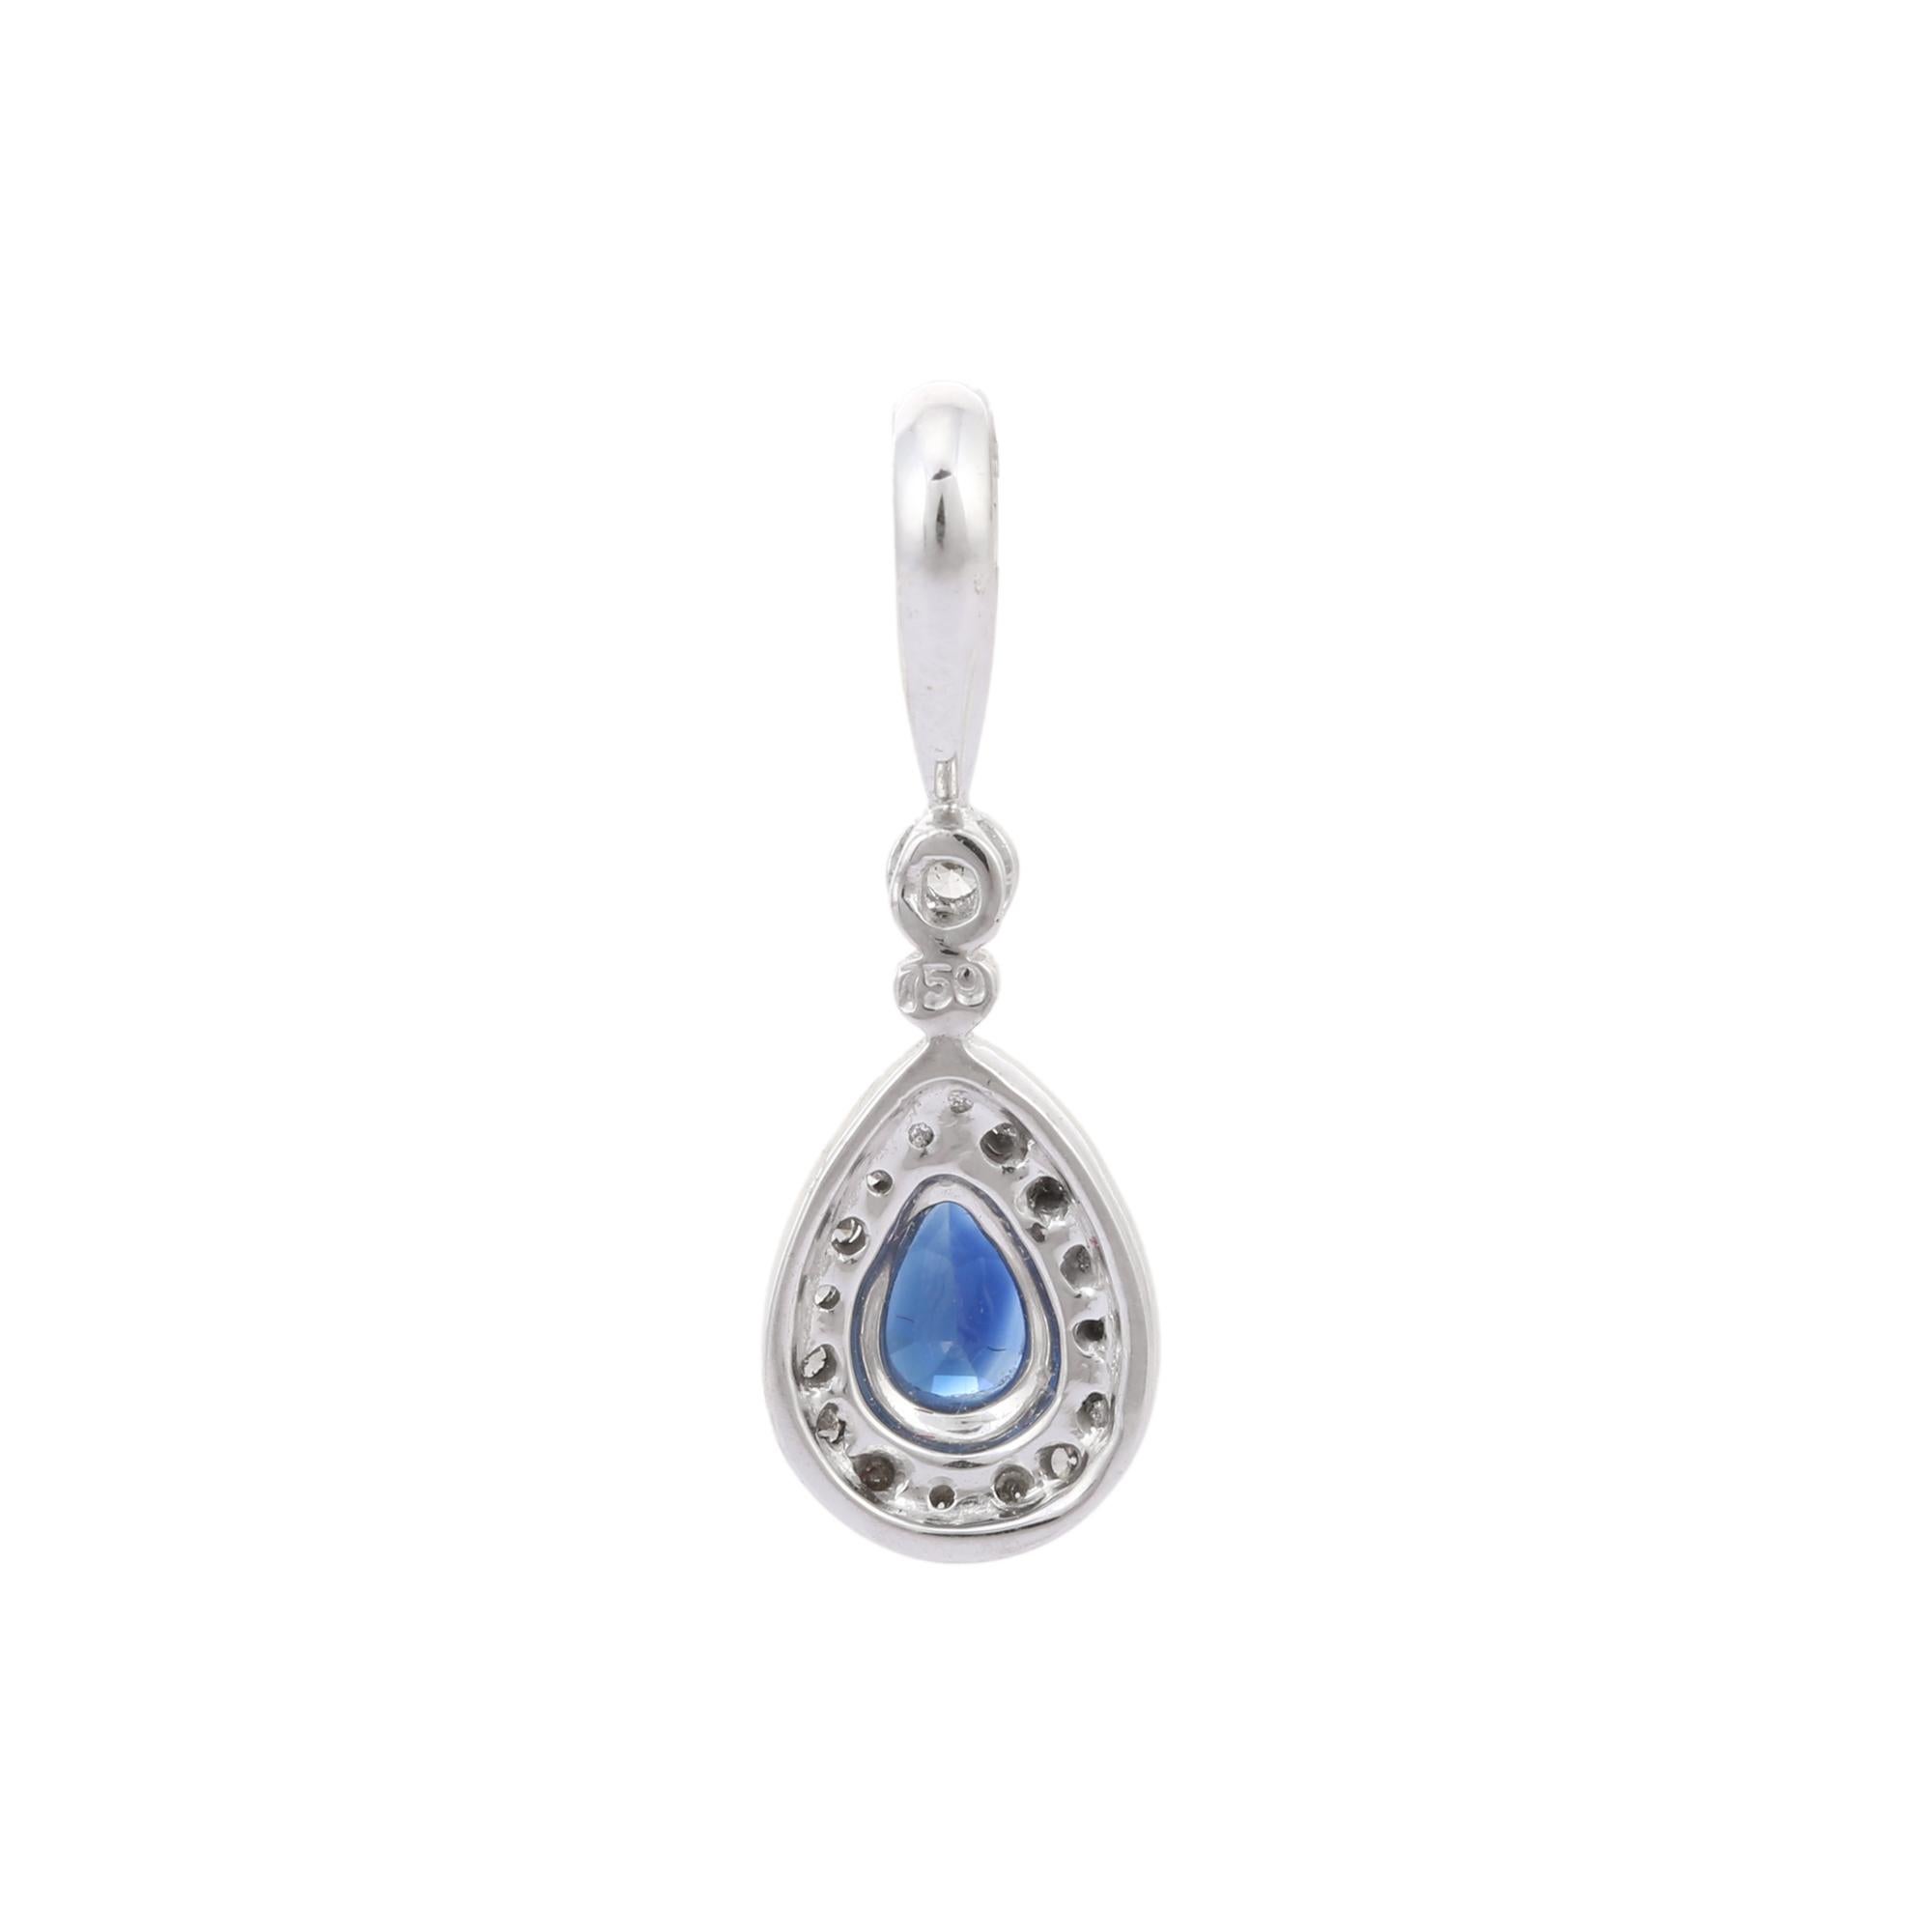 Pear Cut Vivid Blue Sapphire Diamond Pendant Necklace in 18K White Gold In New Condition For Sale In Houston, TX